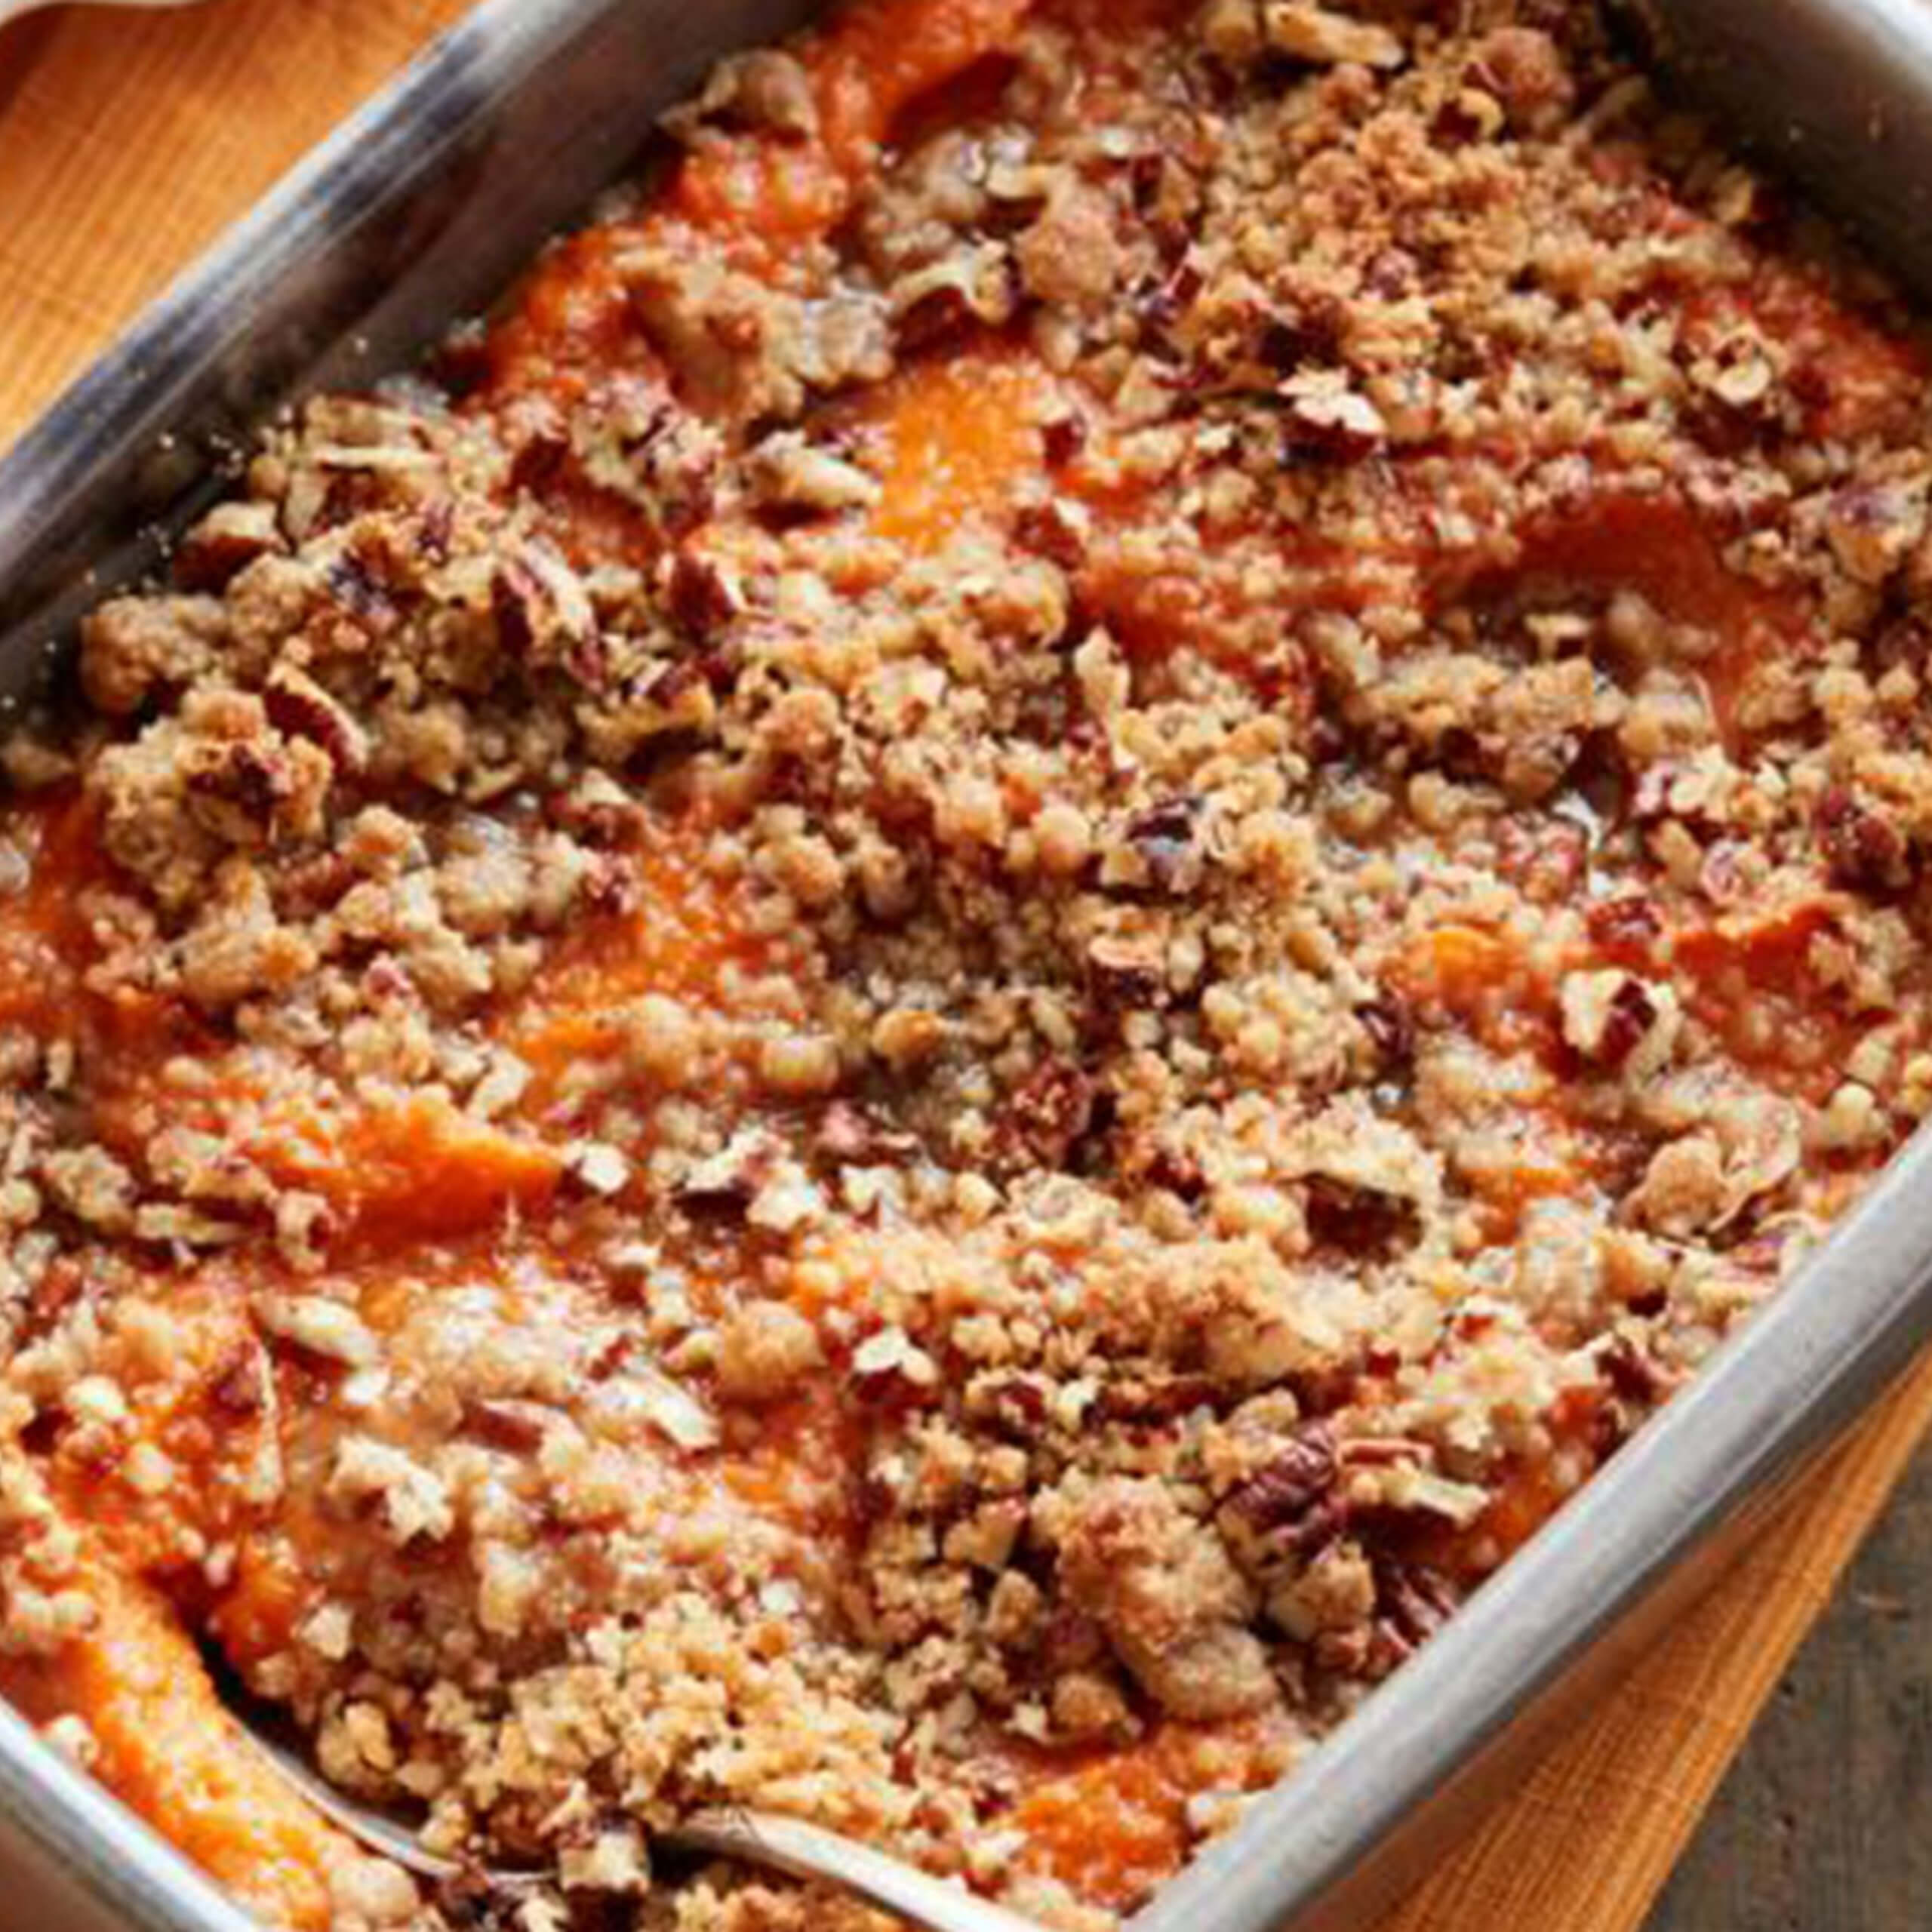 Sweet Potato Souffle with Crunchy Streussel Topping